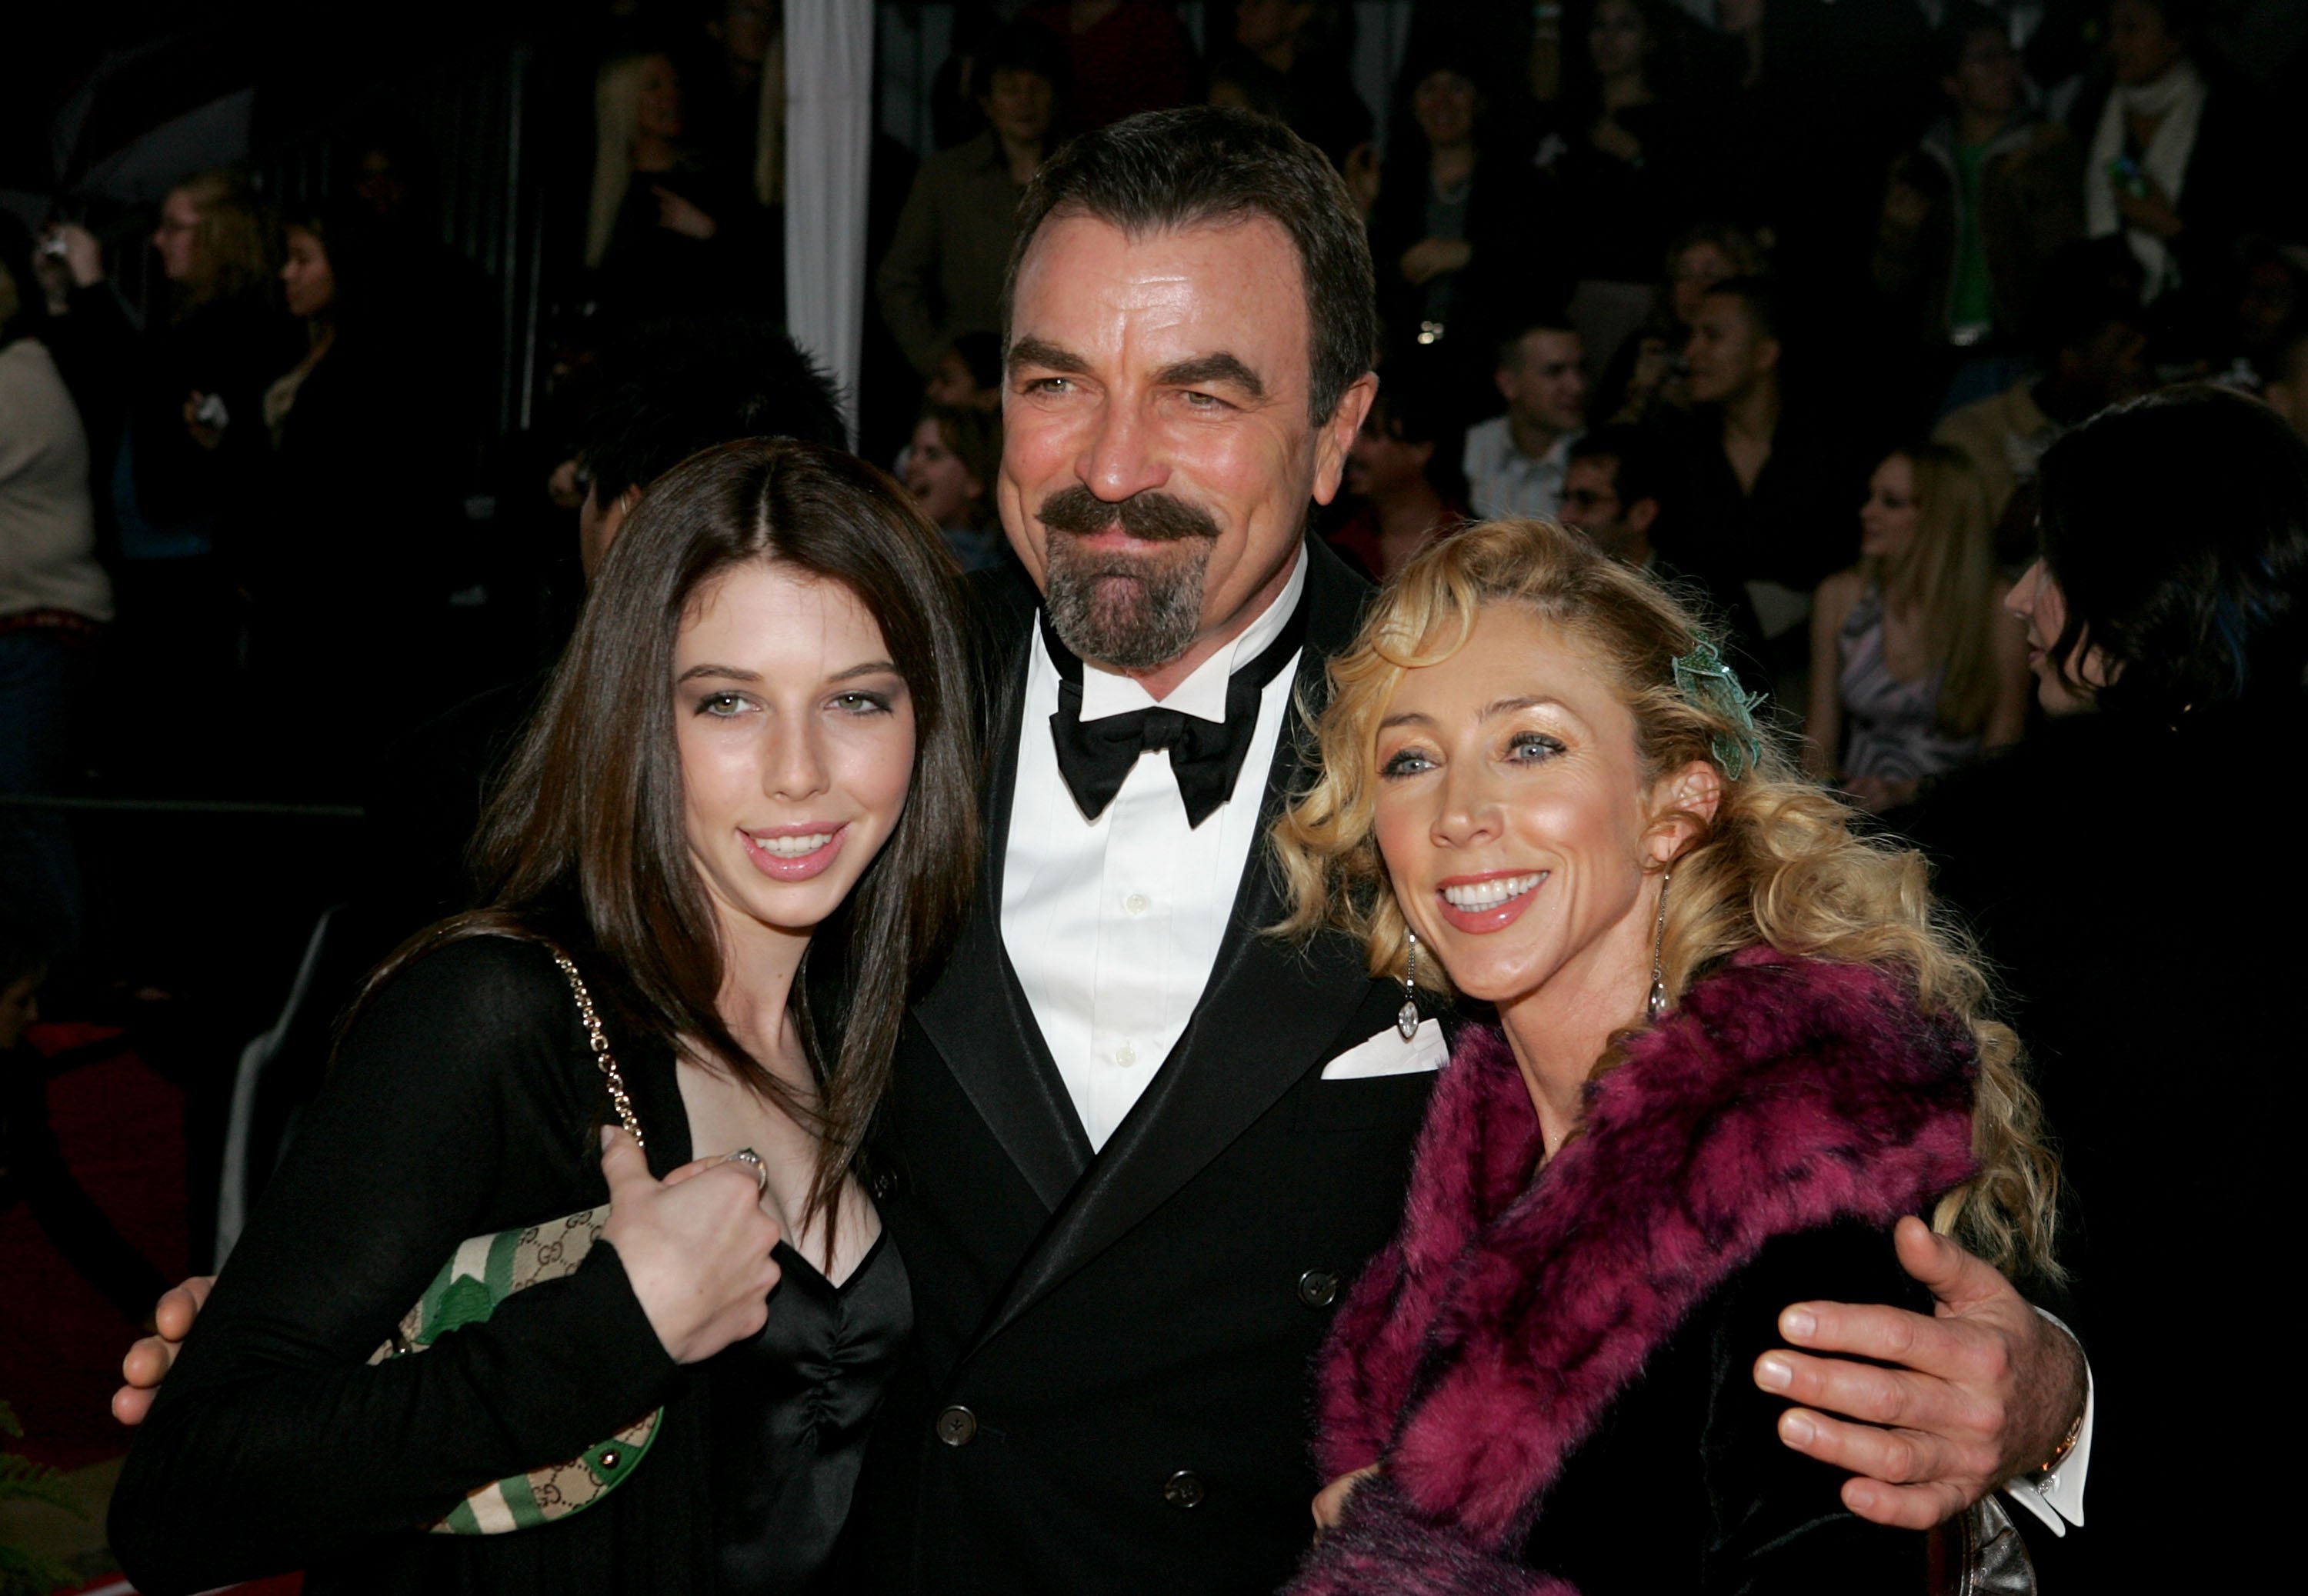 Undated photo of Tom Selleck, daughter Hannah and wife Jillie Mack arriving at the 31st Annual People's Choice Awards |  Photo